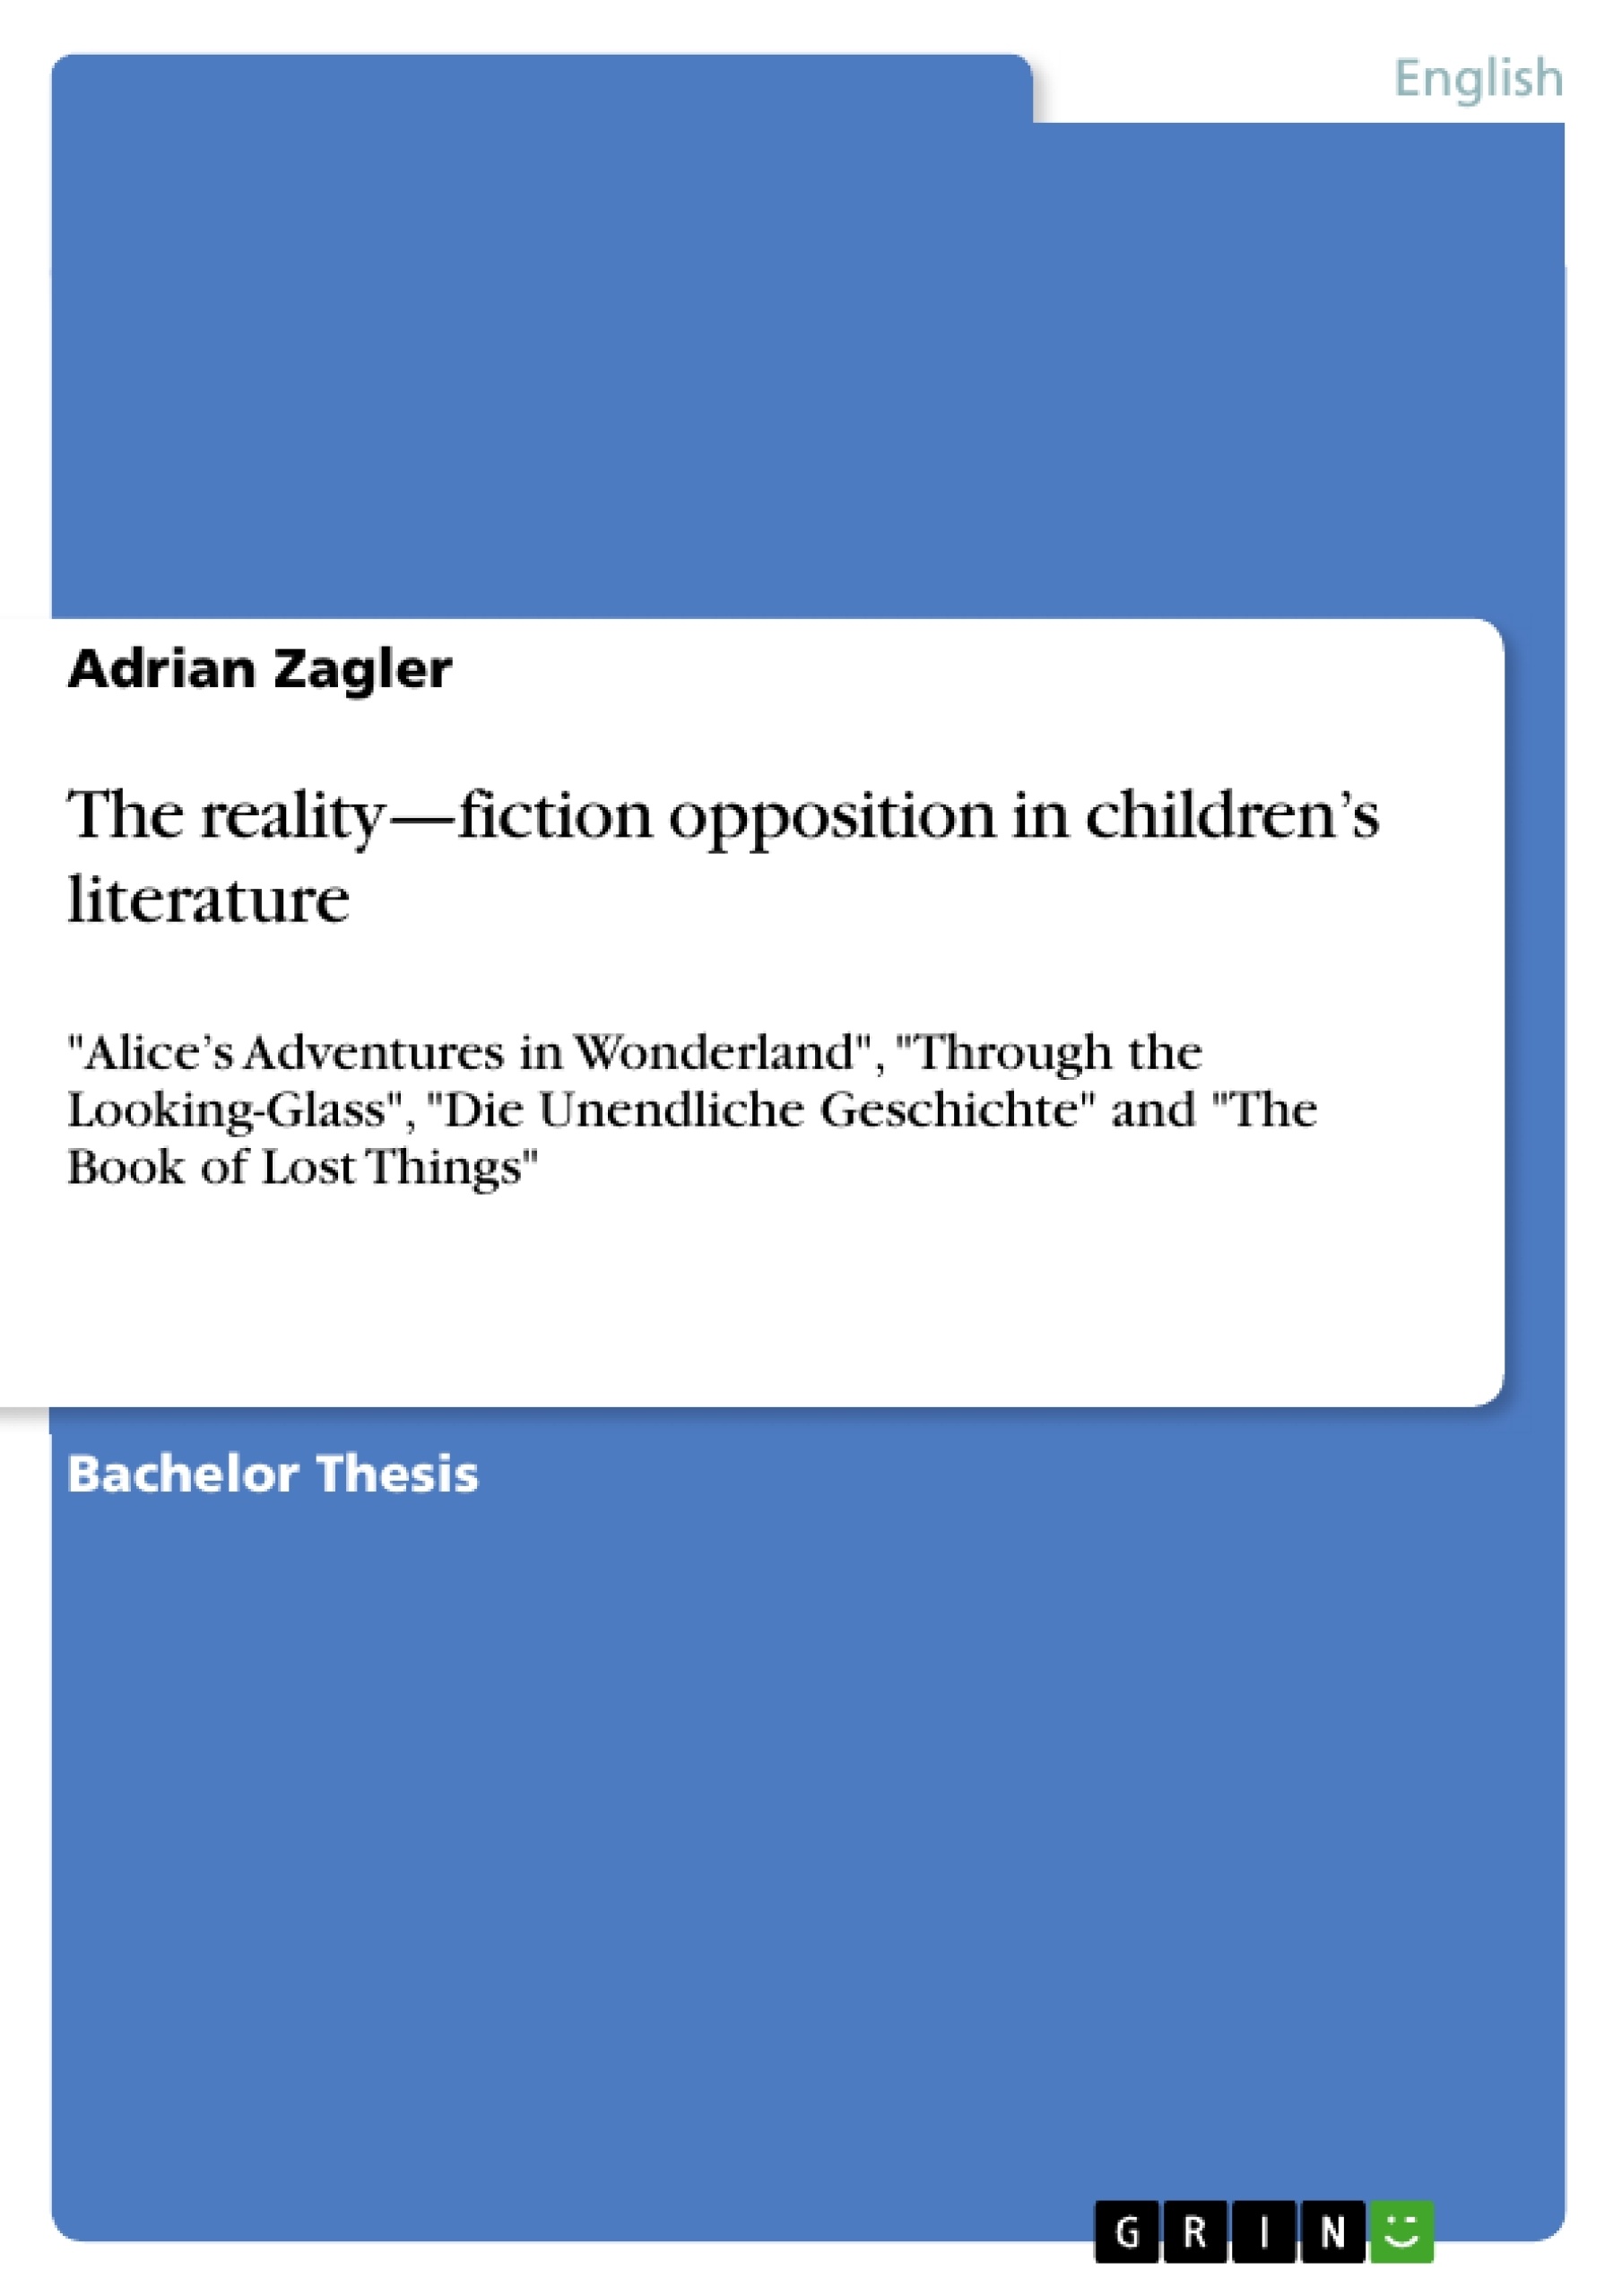 Titre: The reality—fiction opposition in children’s literature